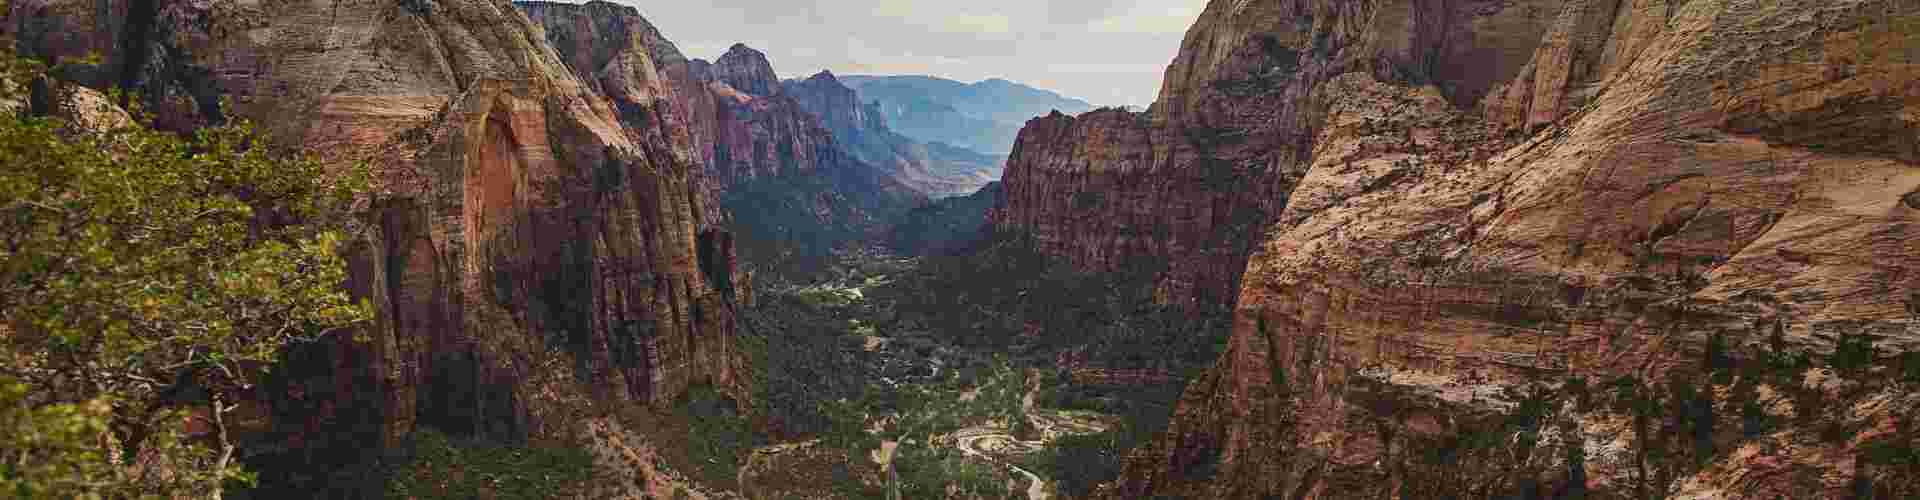 A panoramic view of Zion Canyon in Utah